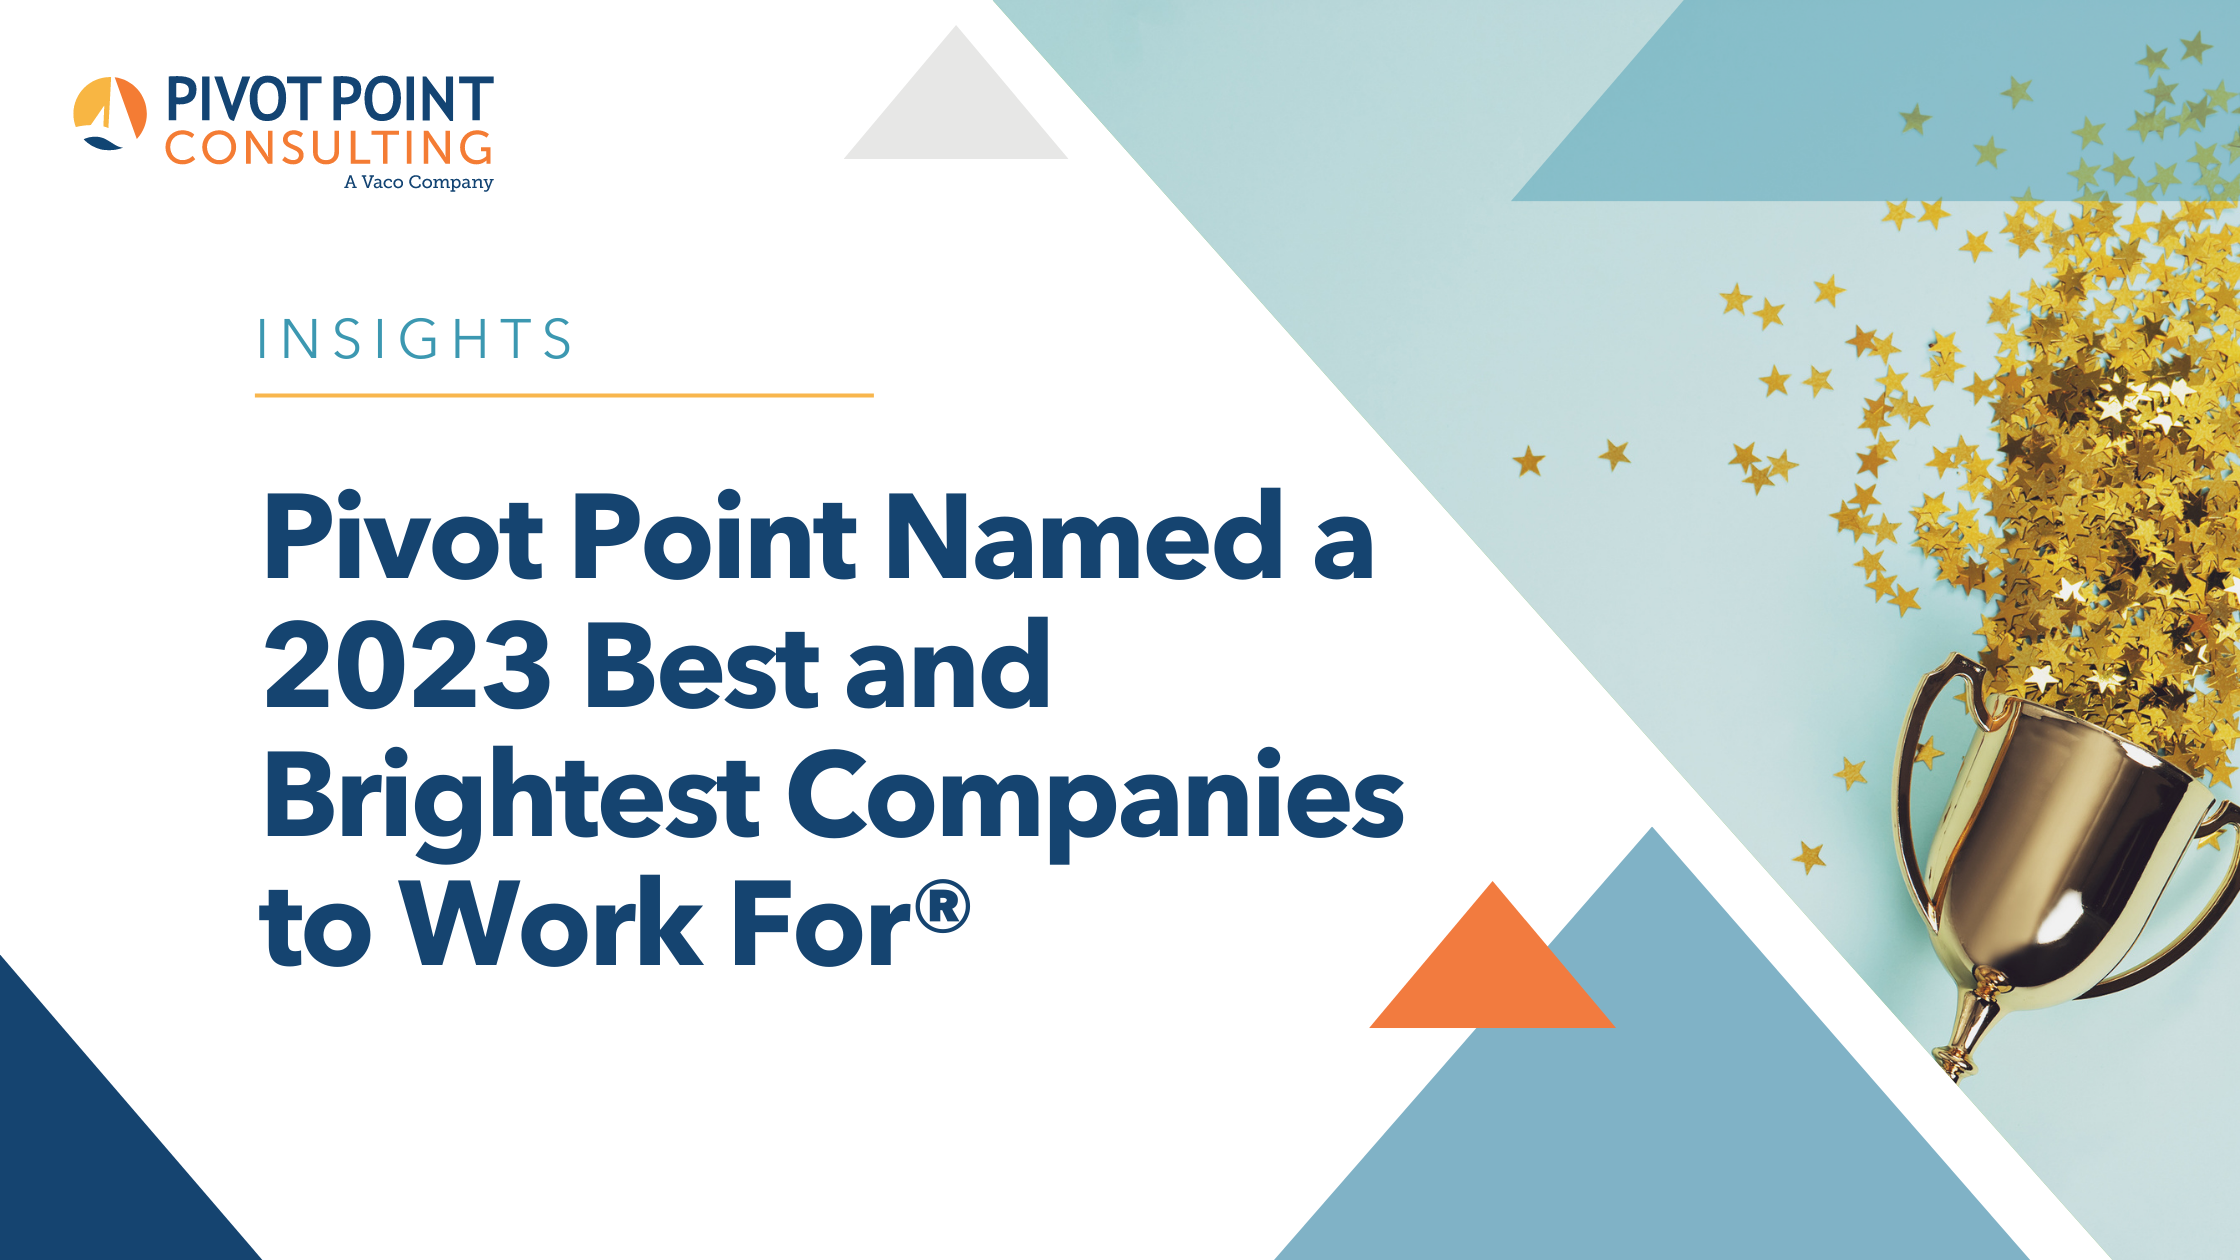 Pivot Point Named a 2023 Best and Brightest Companies to Work For® press release